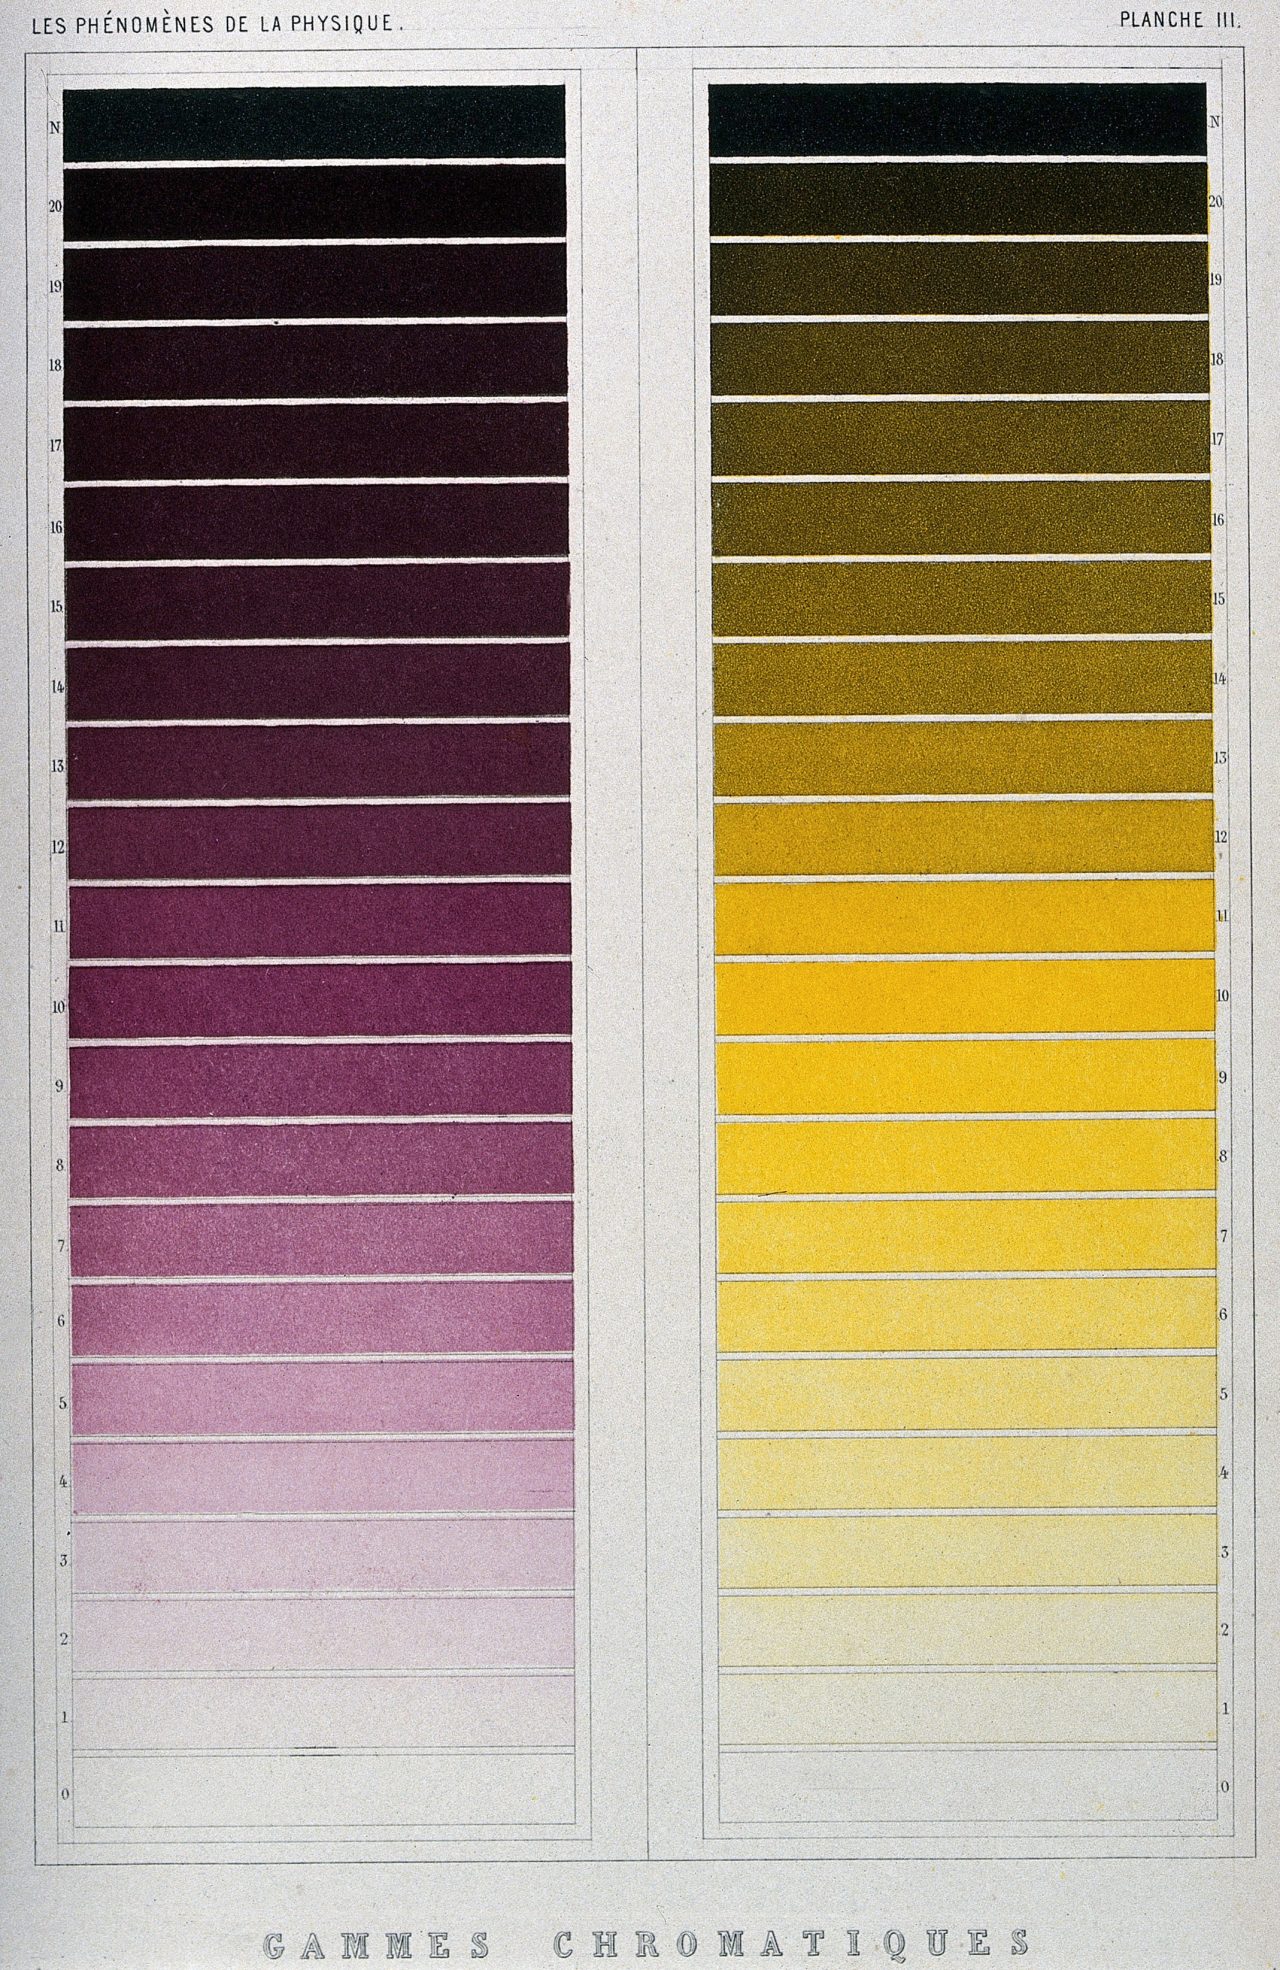 Optics- colour scales for violet and yellow. Coloured process print [?] by R.H. Digeon, ca. 1868, after J. Silbermann.